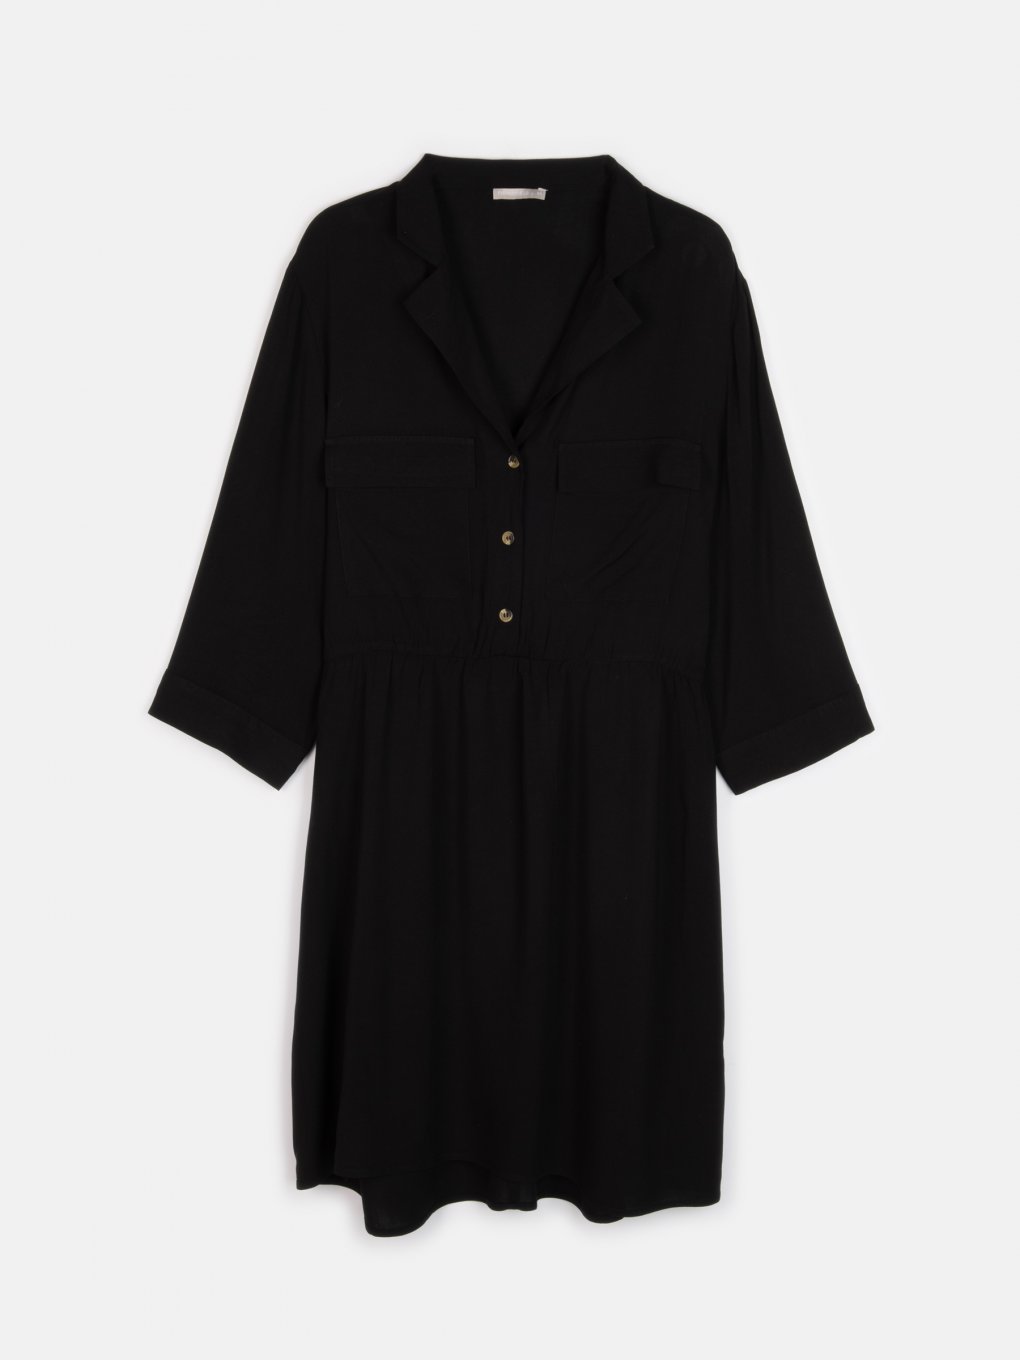 Plus size viscose shirt dress with chest pockets